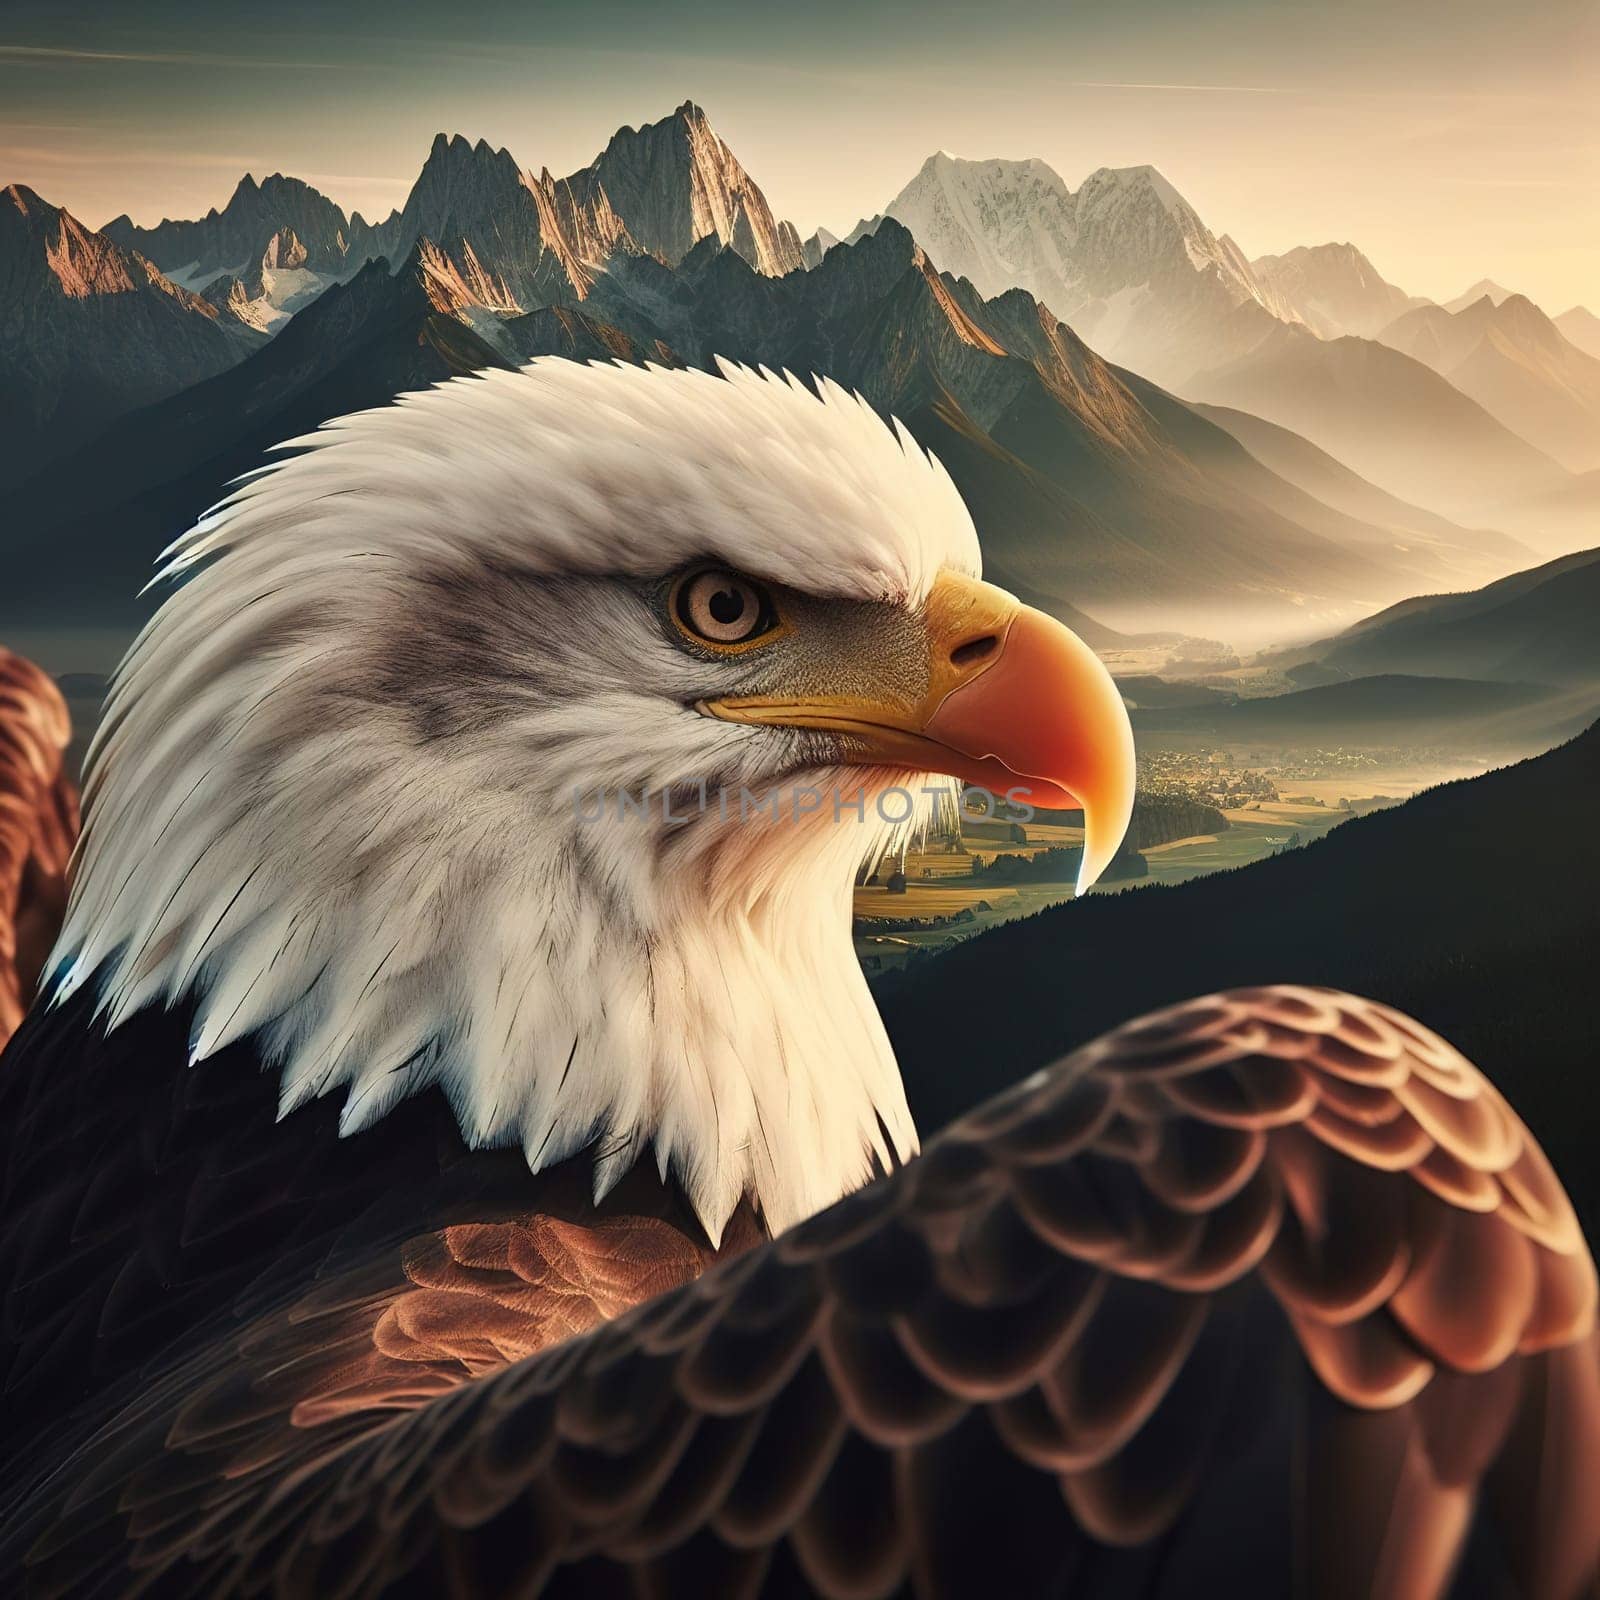 Close-up of an eagle with a white head against the backdrop of the Canadian mountains by gordiza